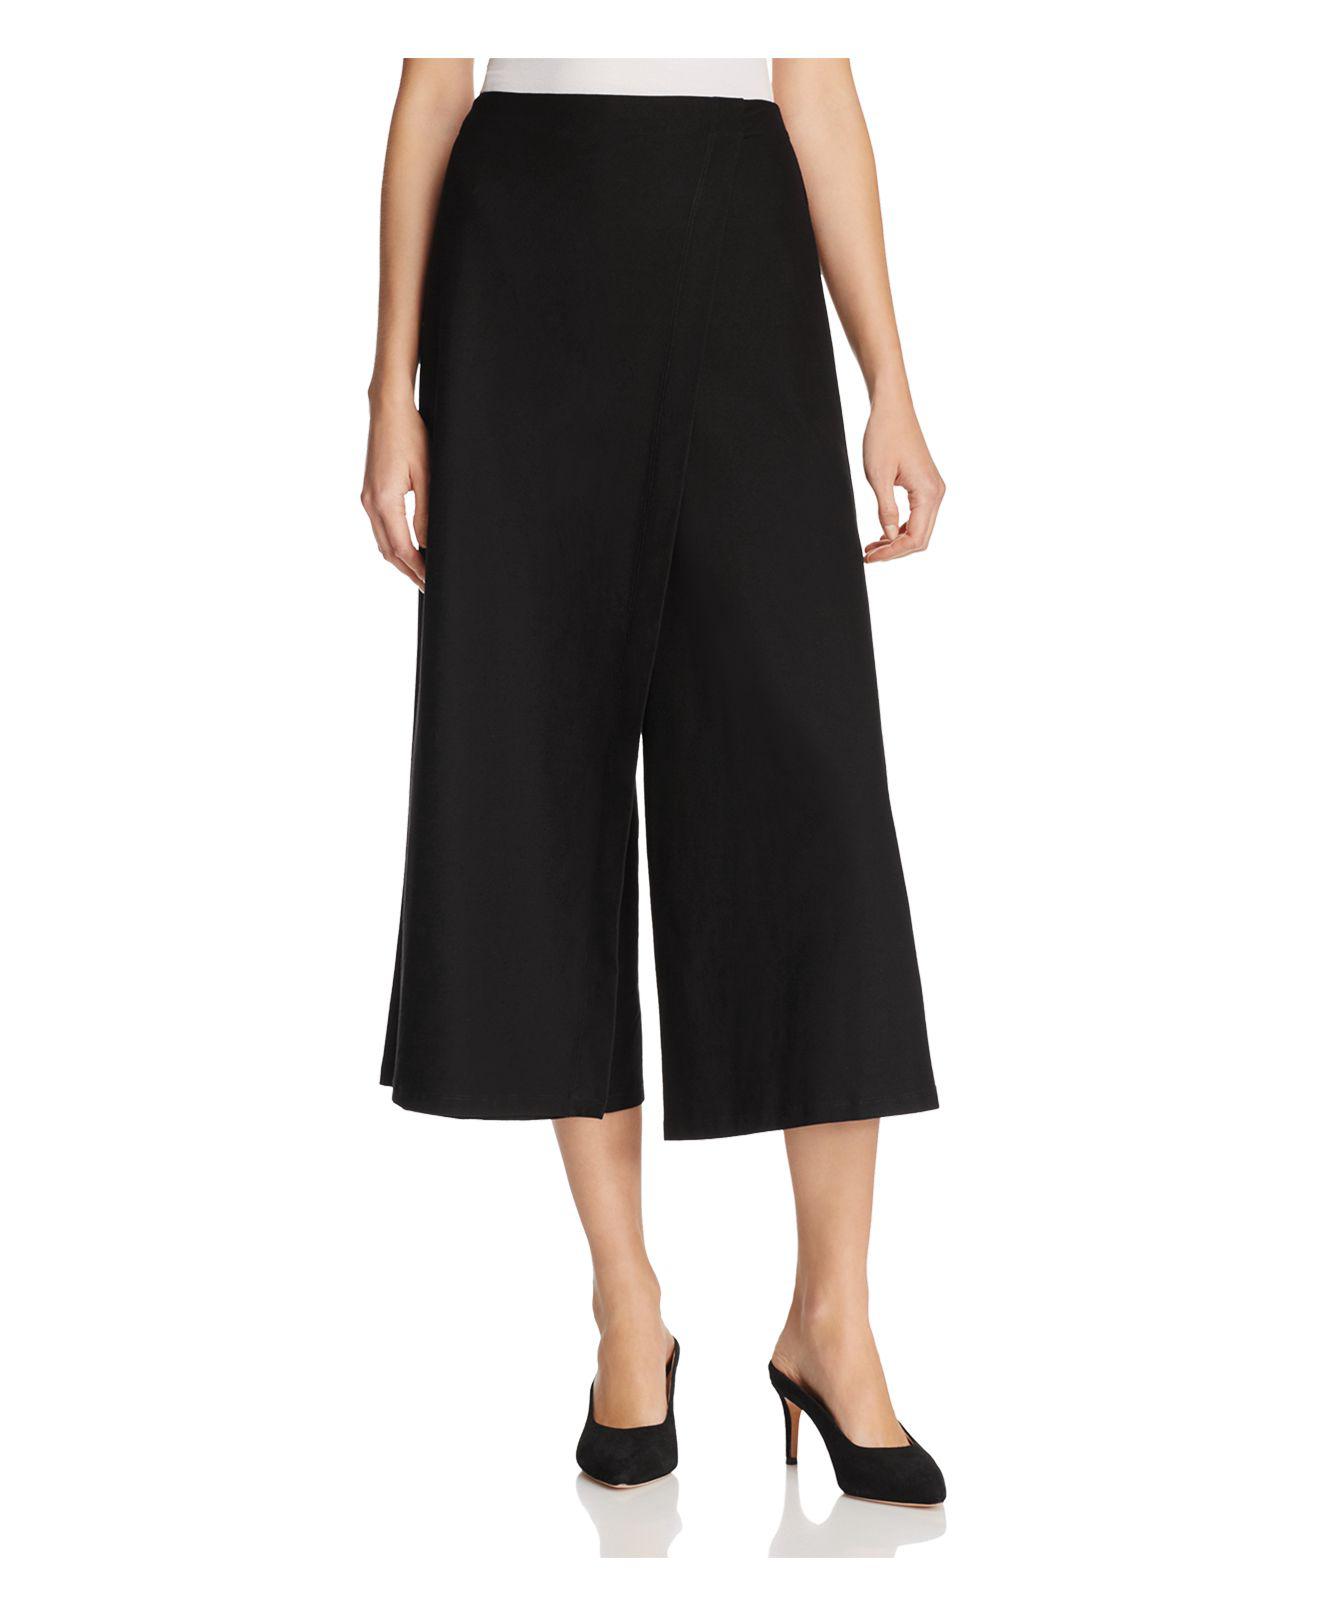 Lyst - Eileen Fisher Wrap Overlay Cropped Pants in Black